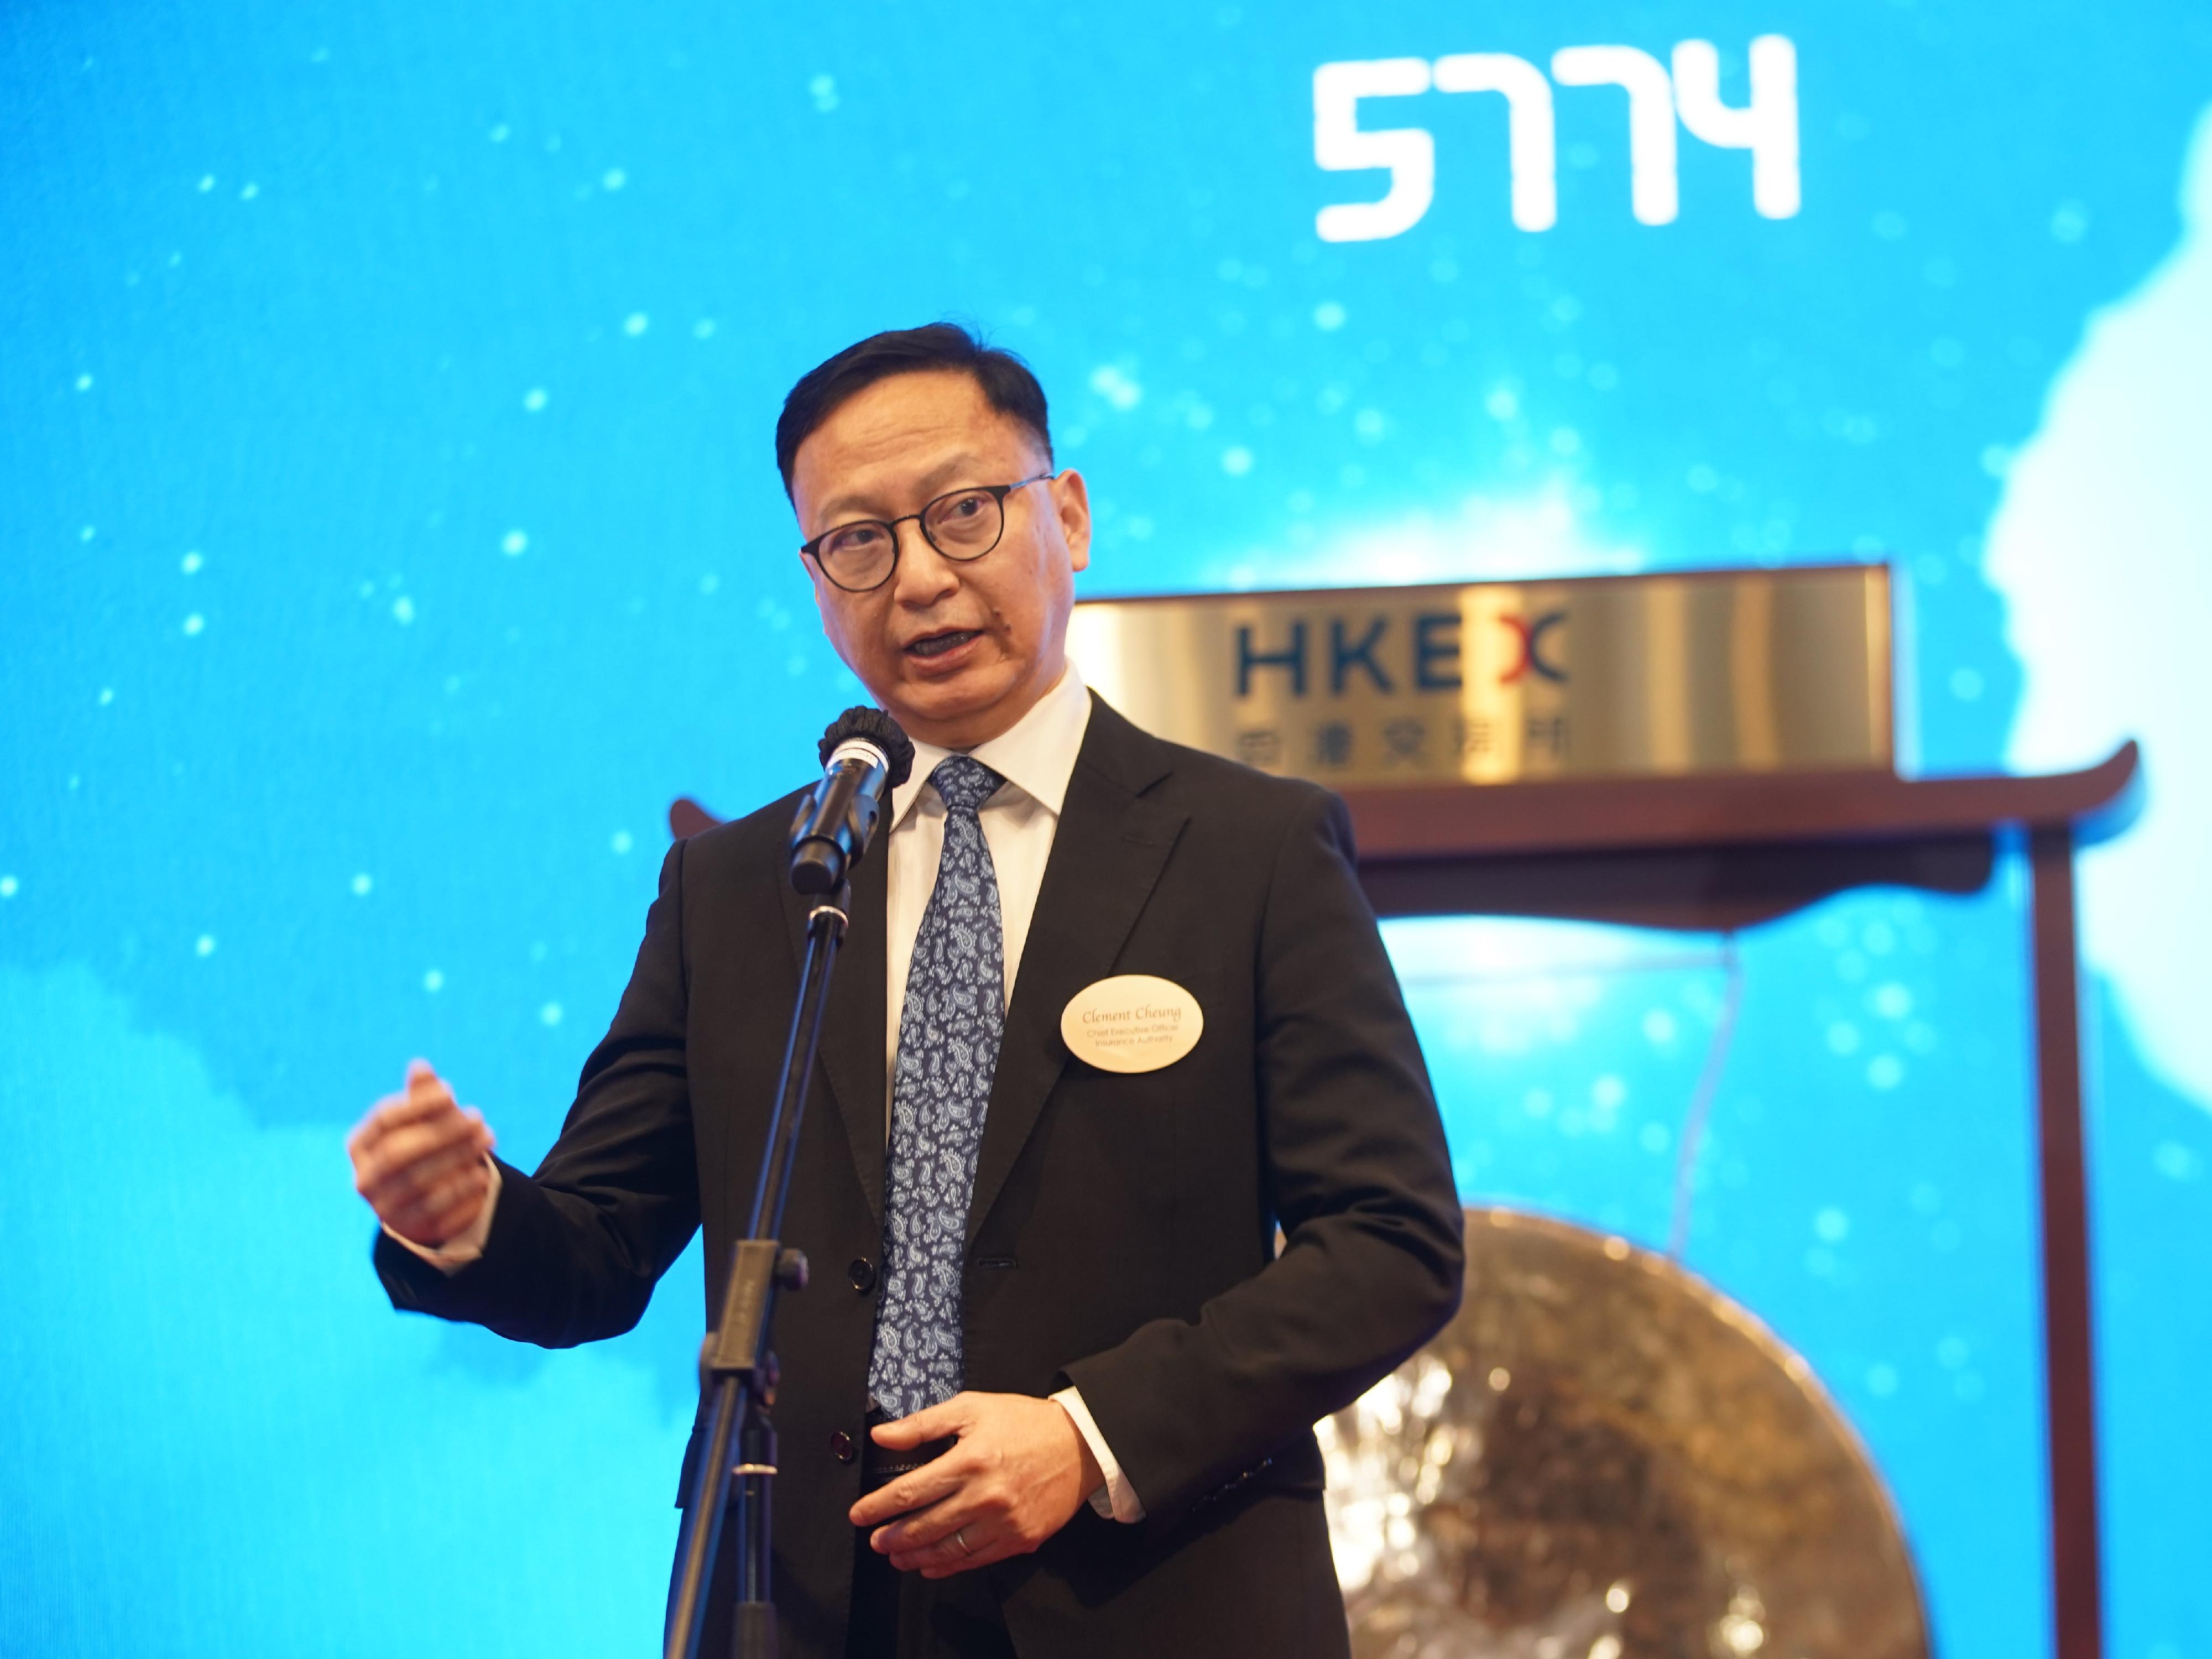 A gong-strike ceremony was held today (March 28) at the Hong Kong Exchanges and Clearing Limited to mark the inaugural insurance-linked securities listing. Photo shows the Chief Executive Officer of the Insurance Authority, Mr Clement Cheung, speaking at the ceremony.